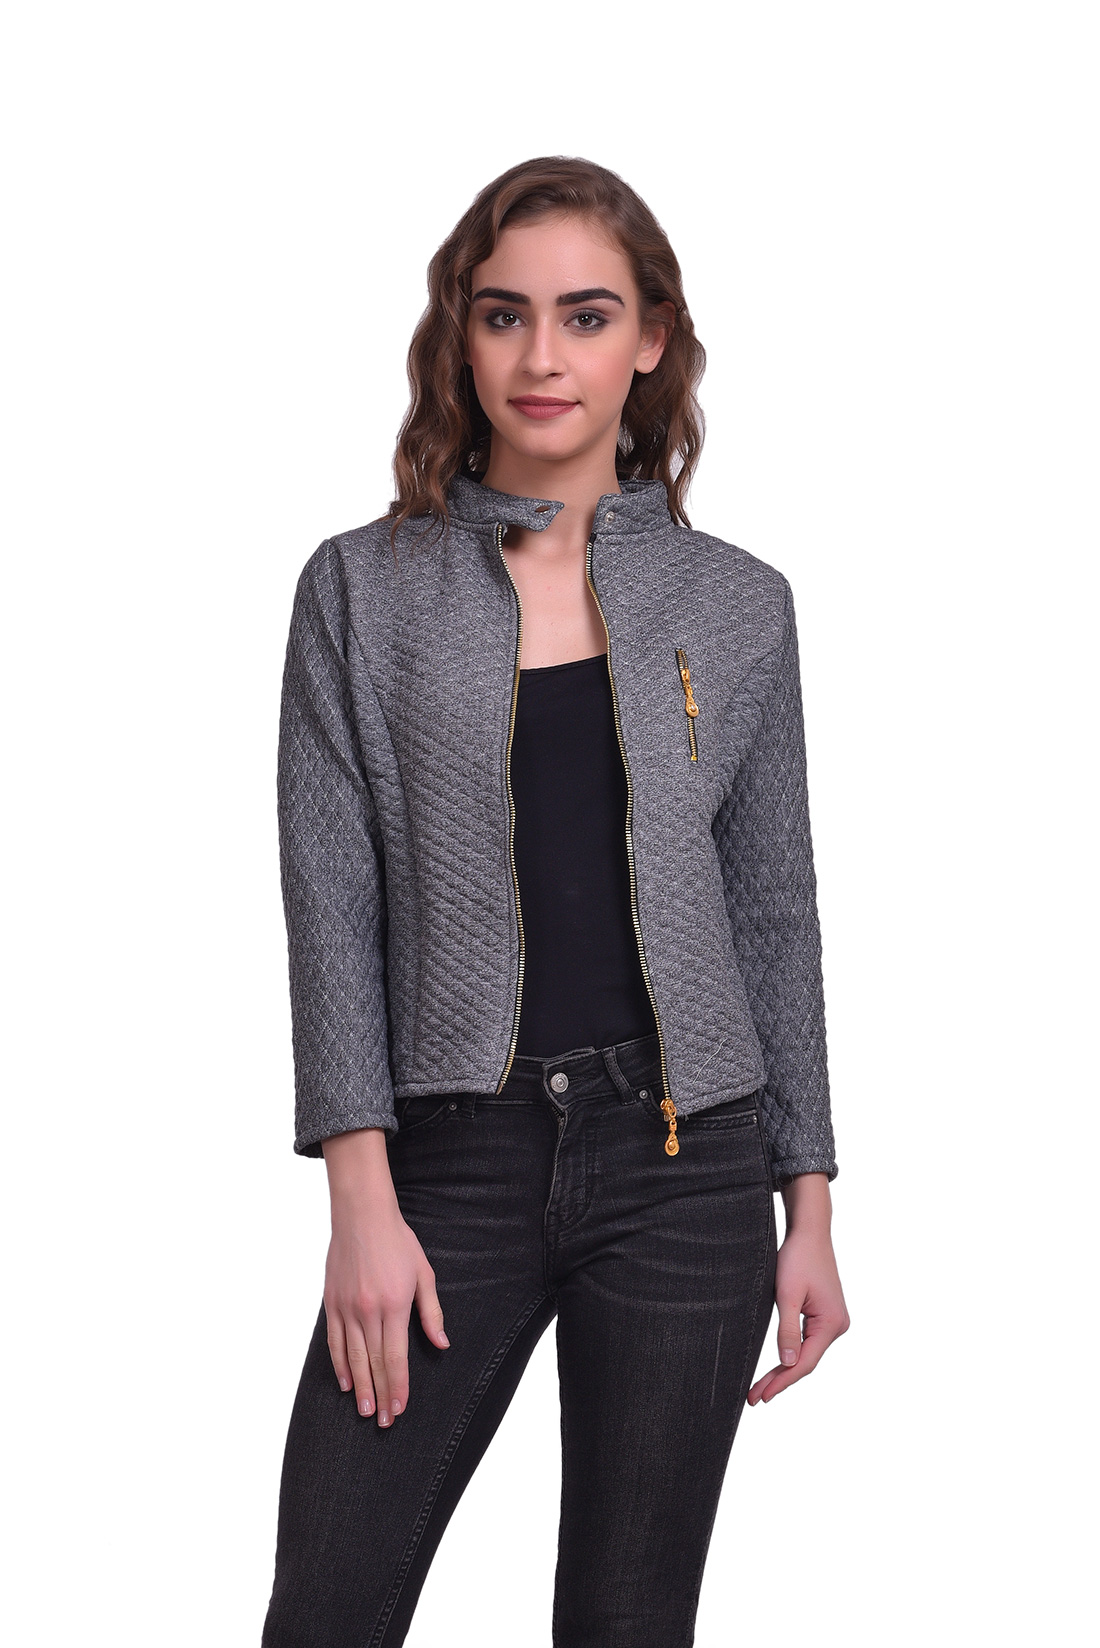 Buy Westrobe Women Grey Quilted jacket Online @ ₹999 from ShopClues